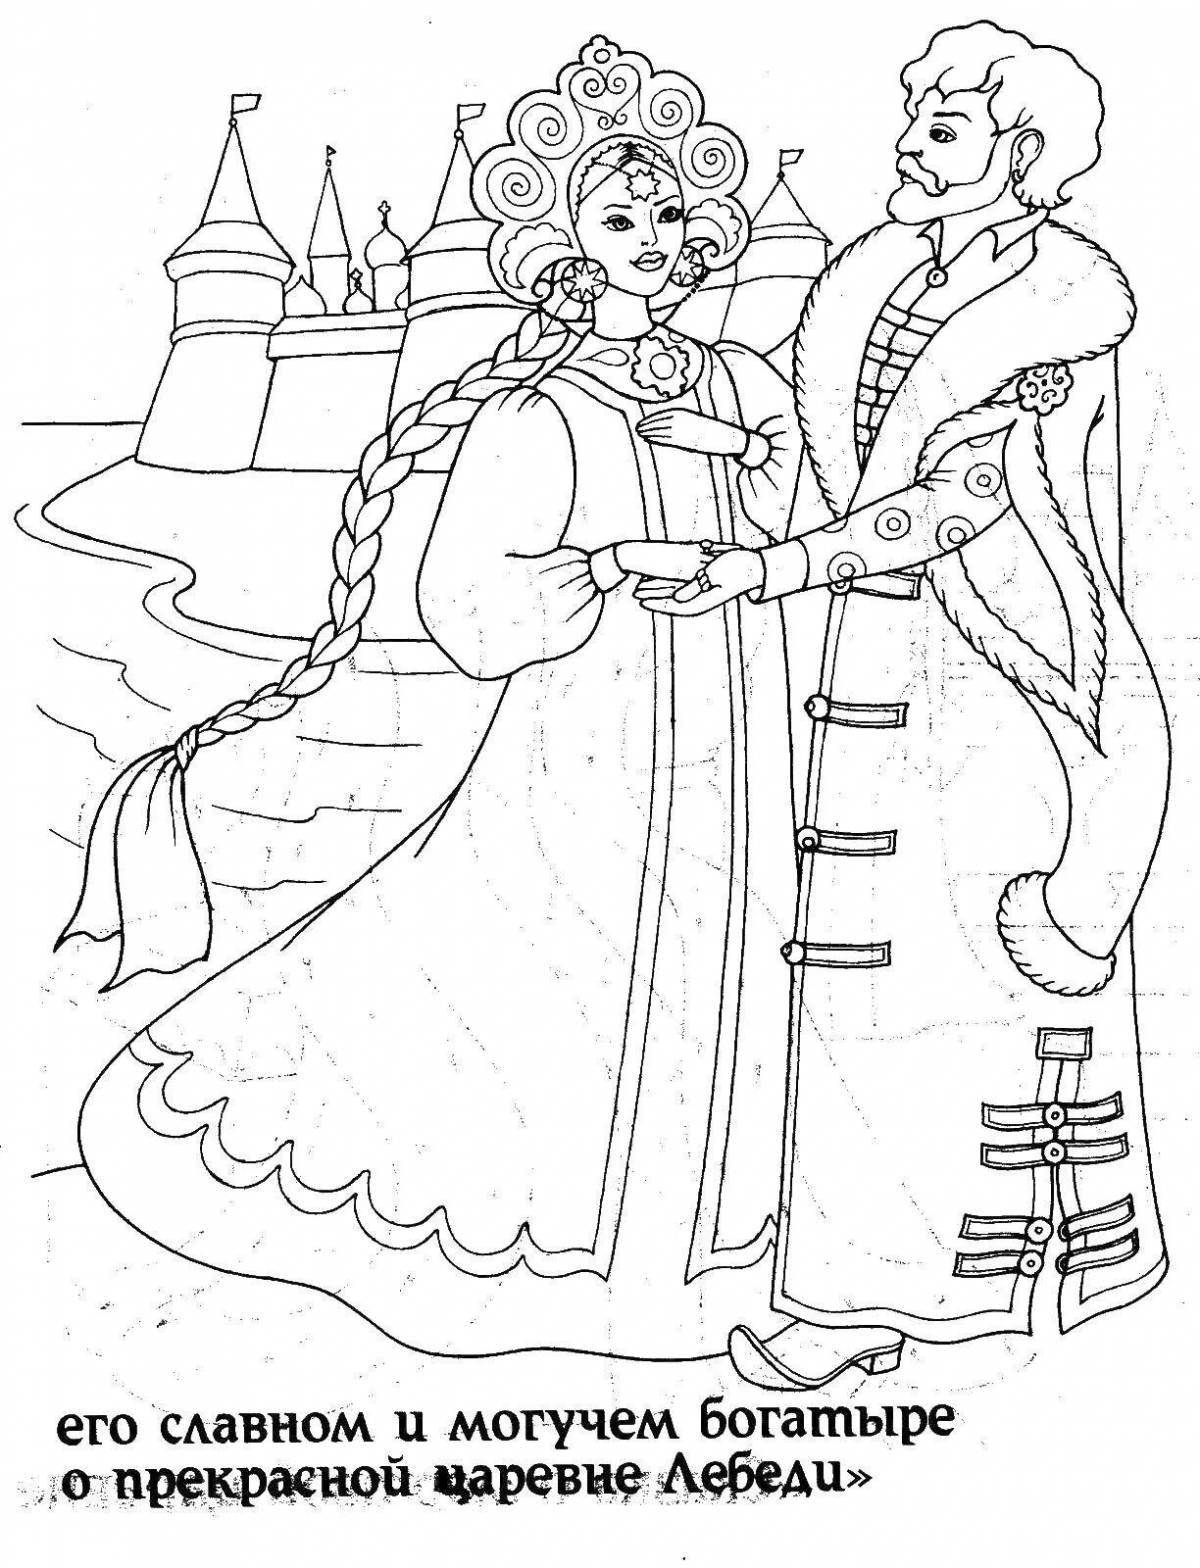 A funny coloring book based on Pushkin's fairy tales in kindergarten